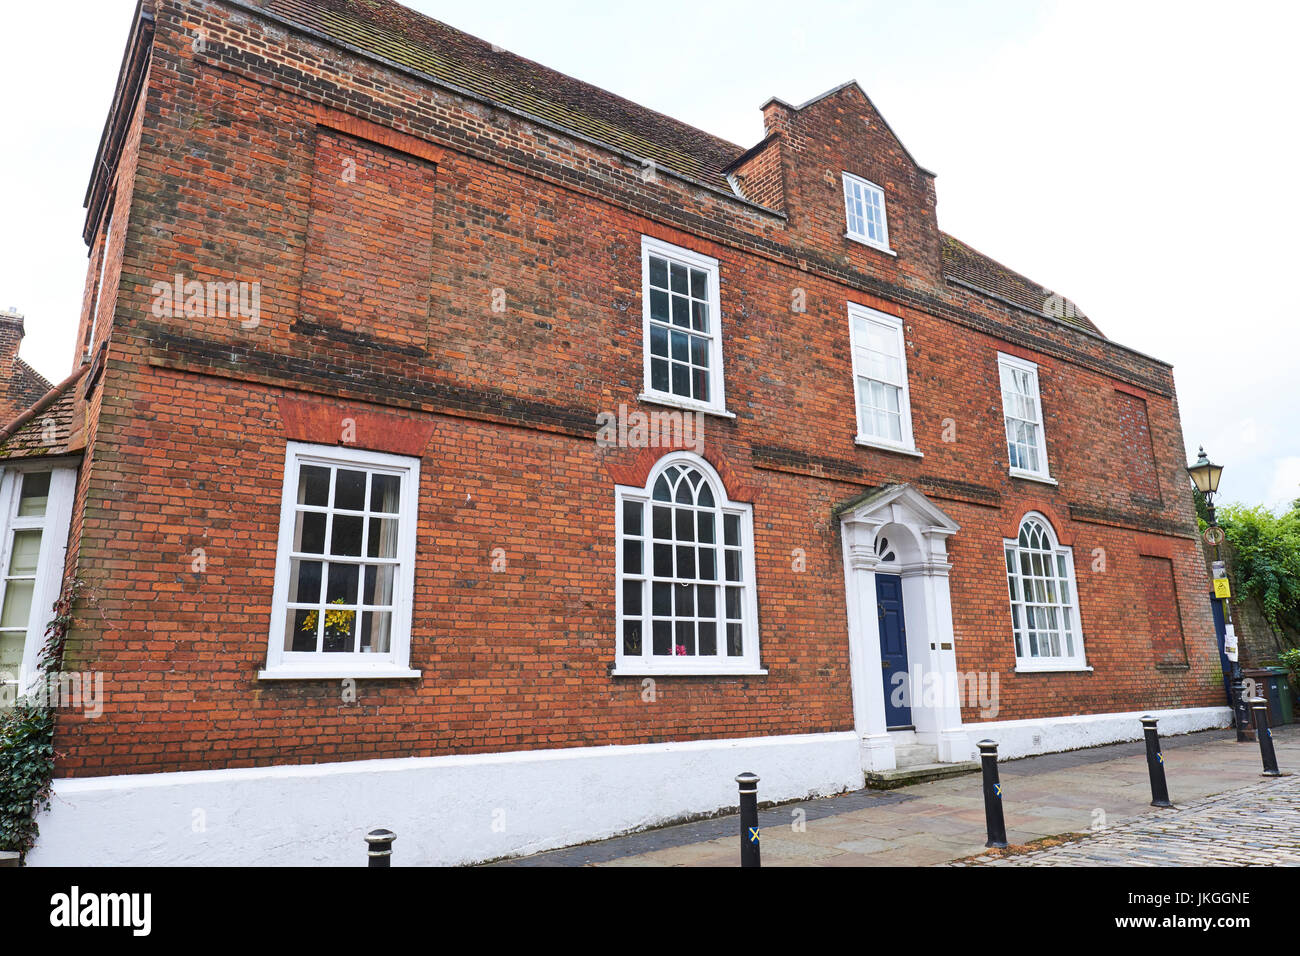 The Old Rectory, Sumpter Yard, St Albans, Hertfordshire, UK Stock Photo